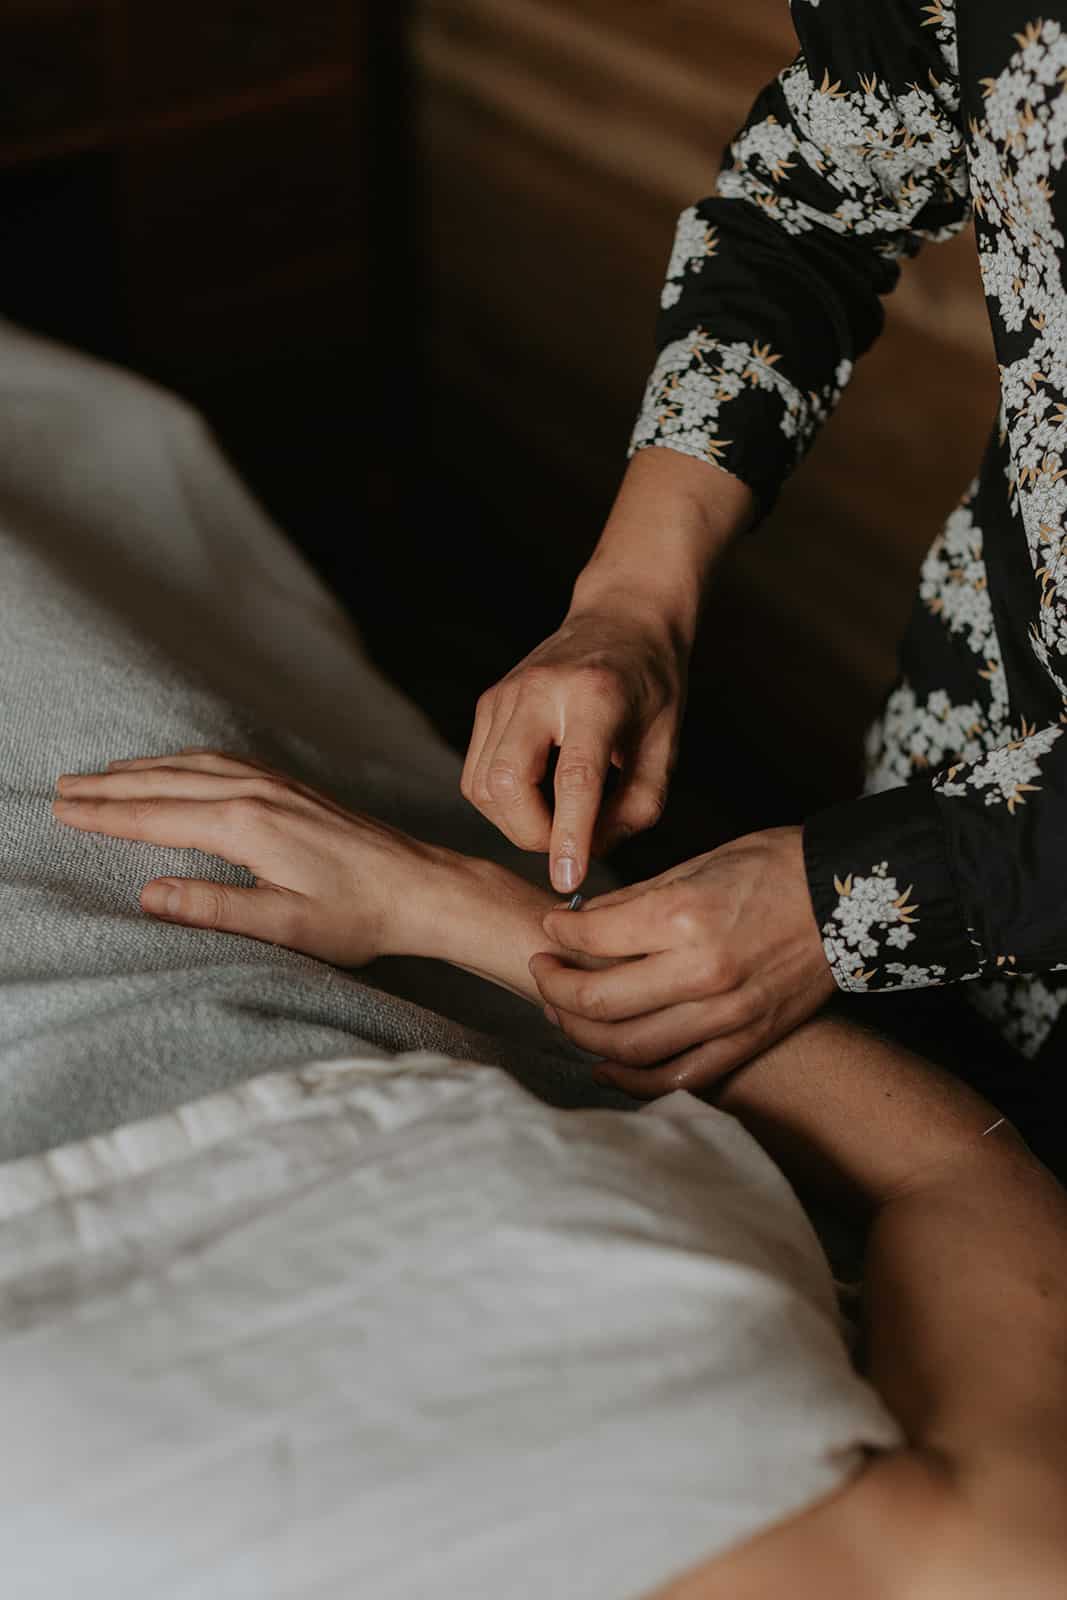 Acupuncture specialist in Victoria administering needle therapy on a patient's arm for pain relief and healing.